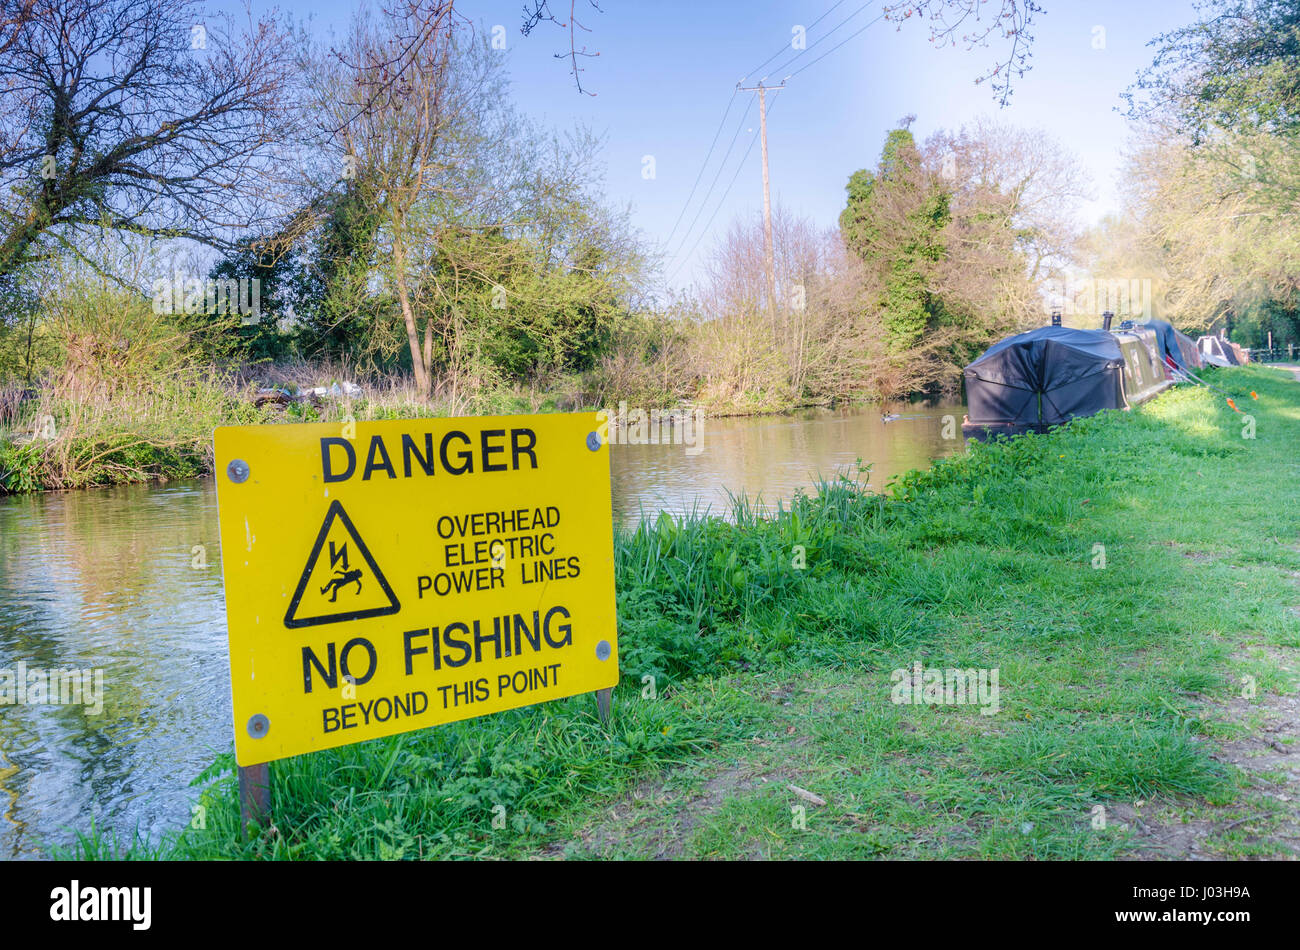 A sign indicating that no fishing is allowed on a section of The river Kennet because of overhead power lines. Stock Photo